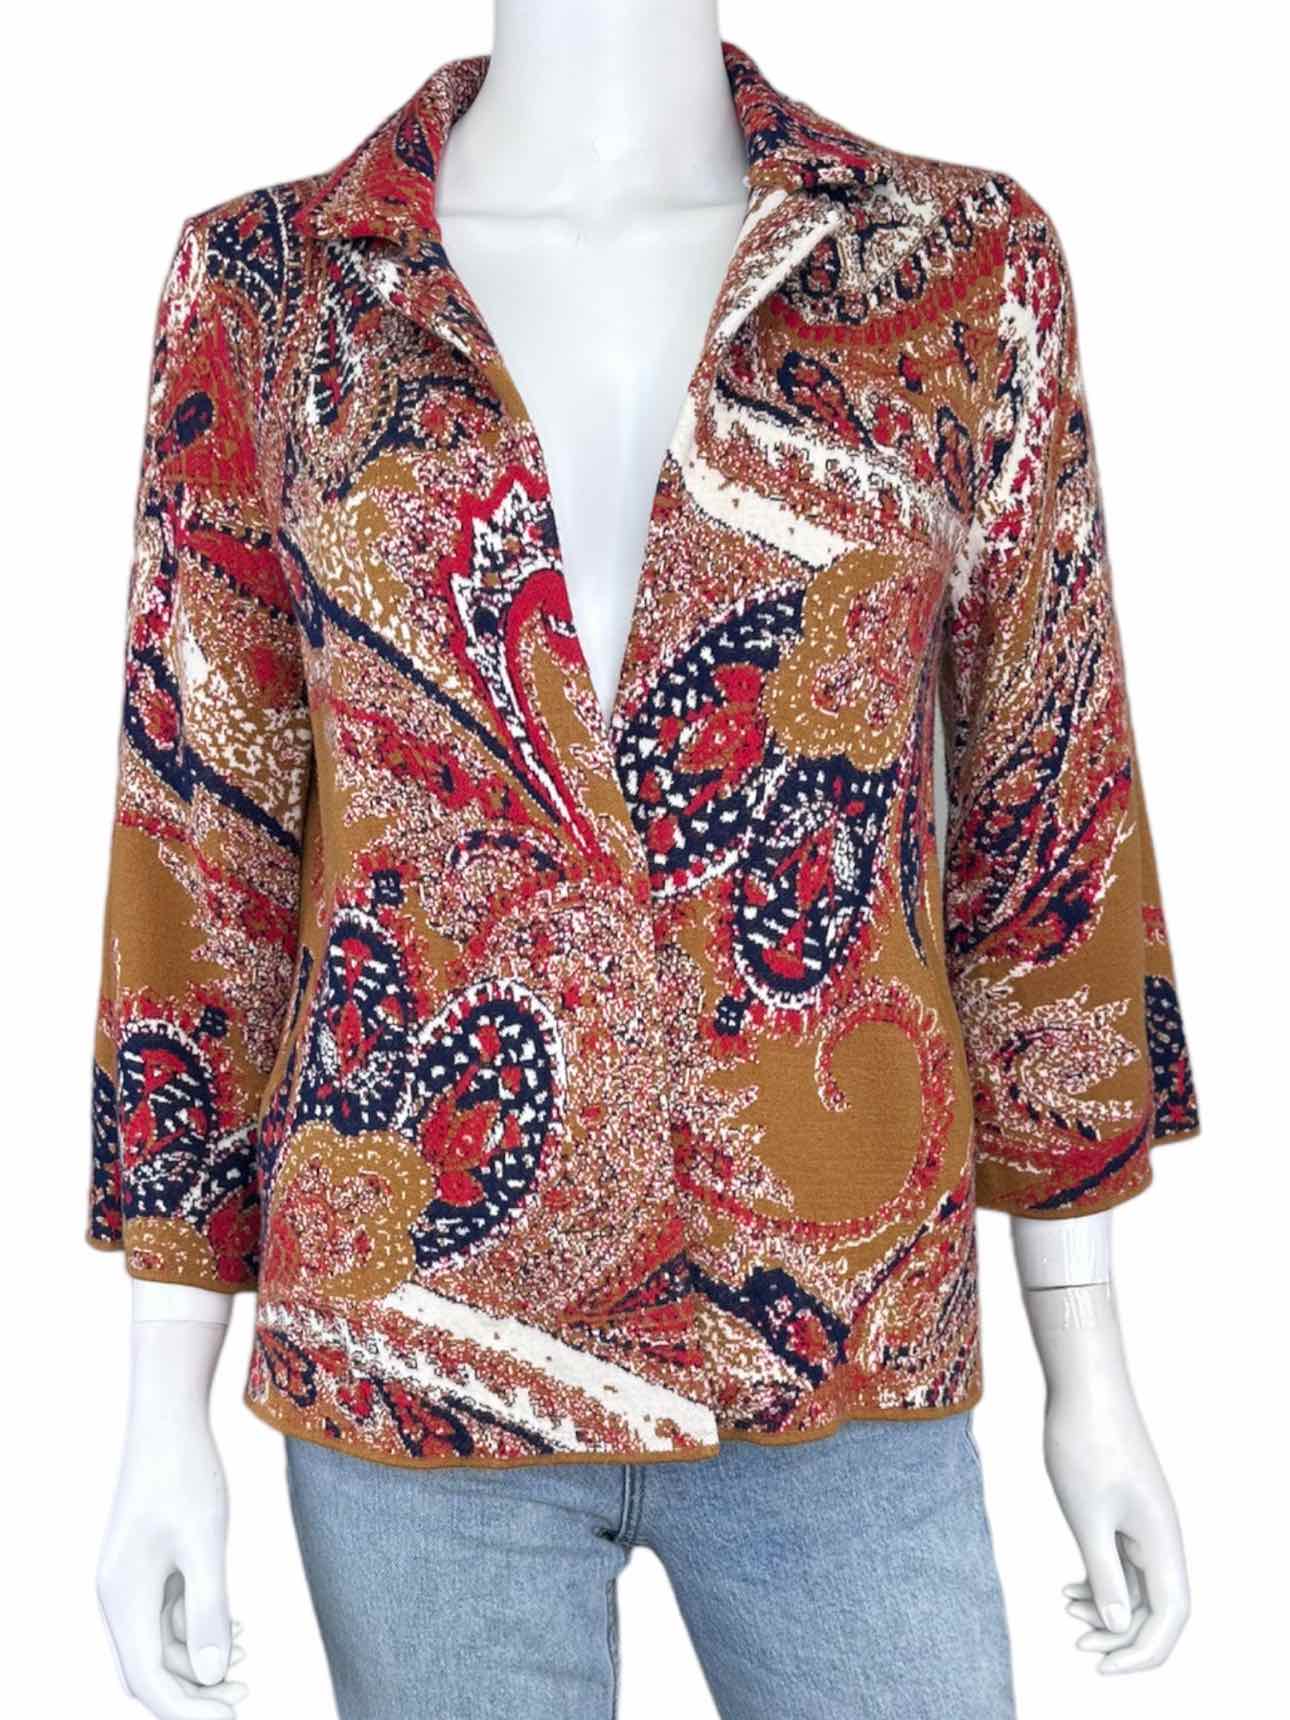 MOTH by Anthropologie Sweater Knit Cardigan Size XS